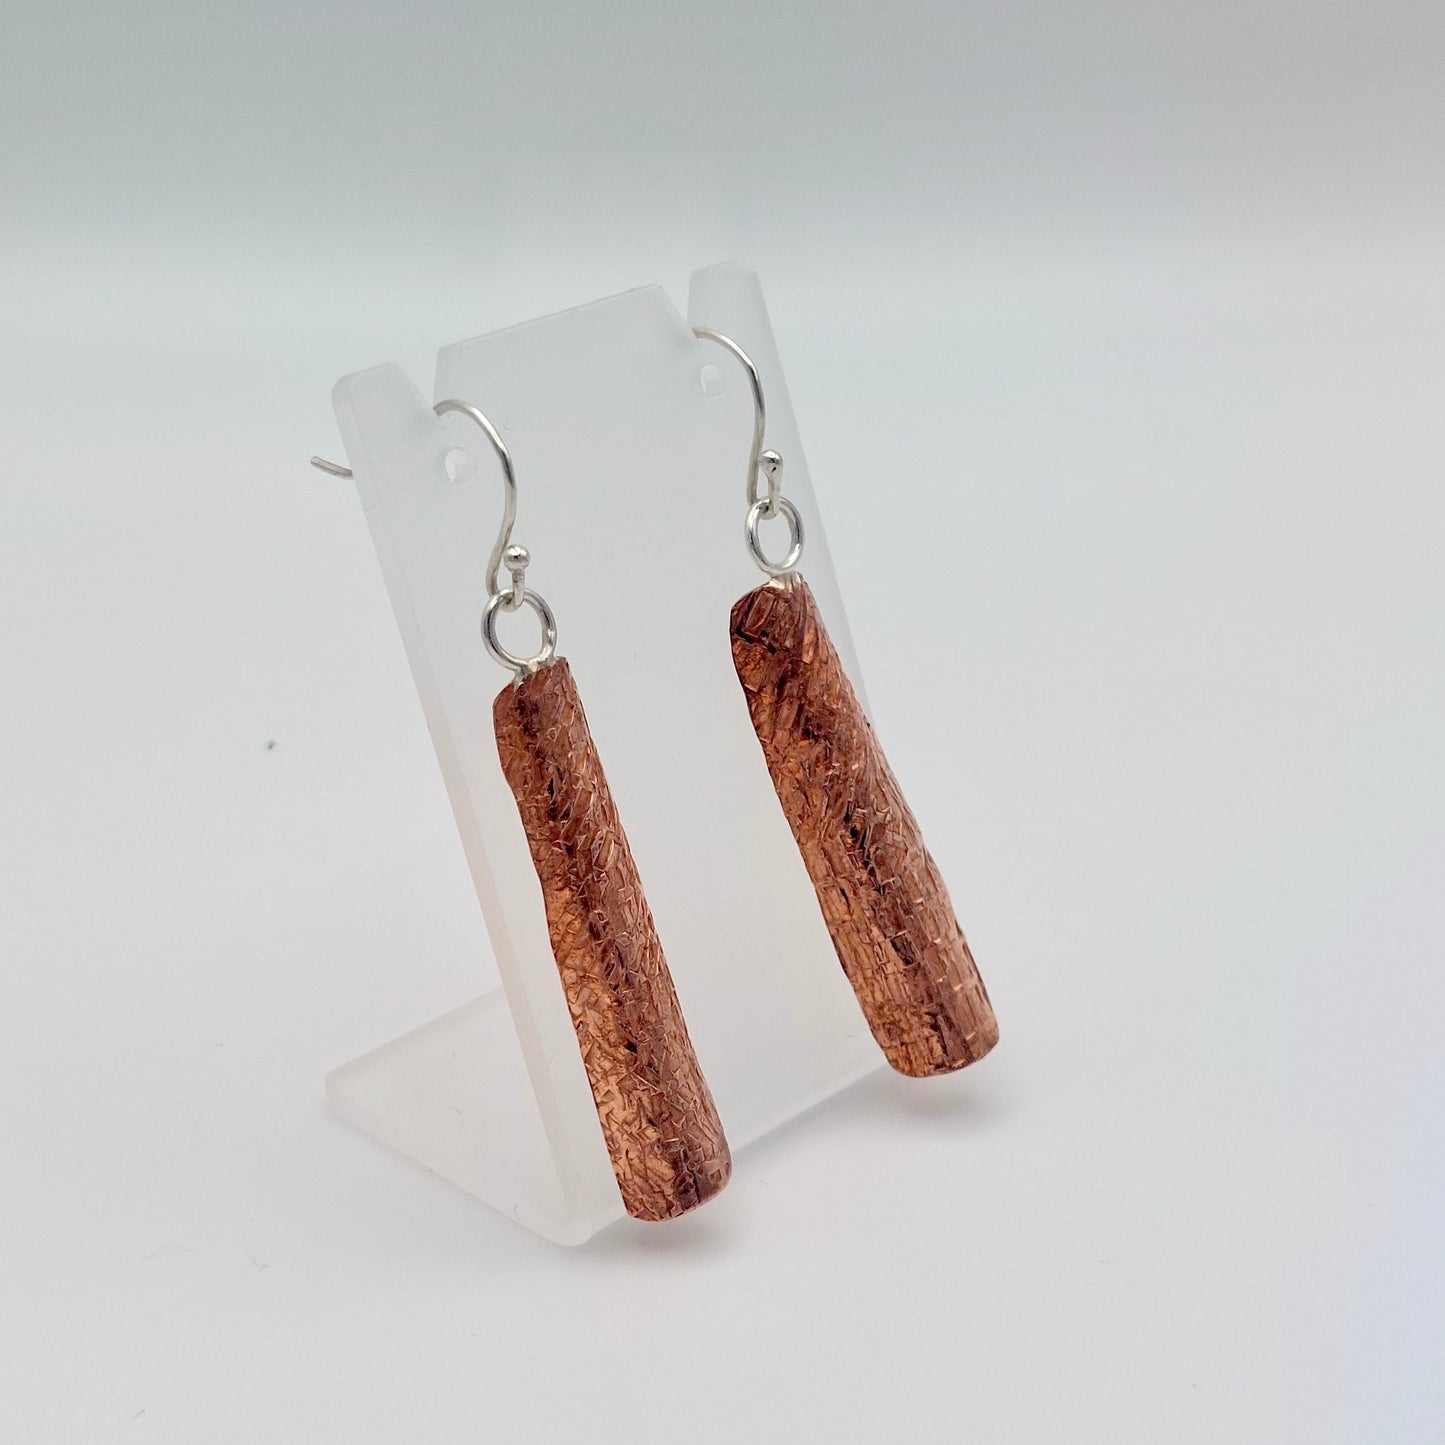 Curved and Textured Copper Earrings